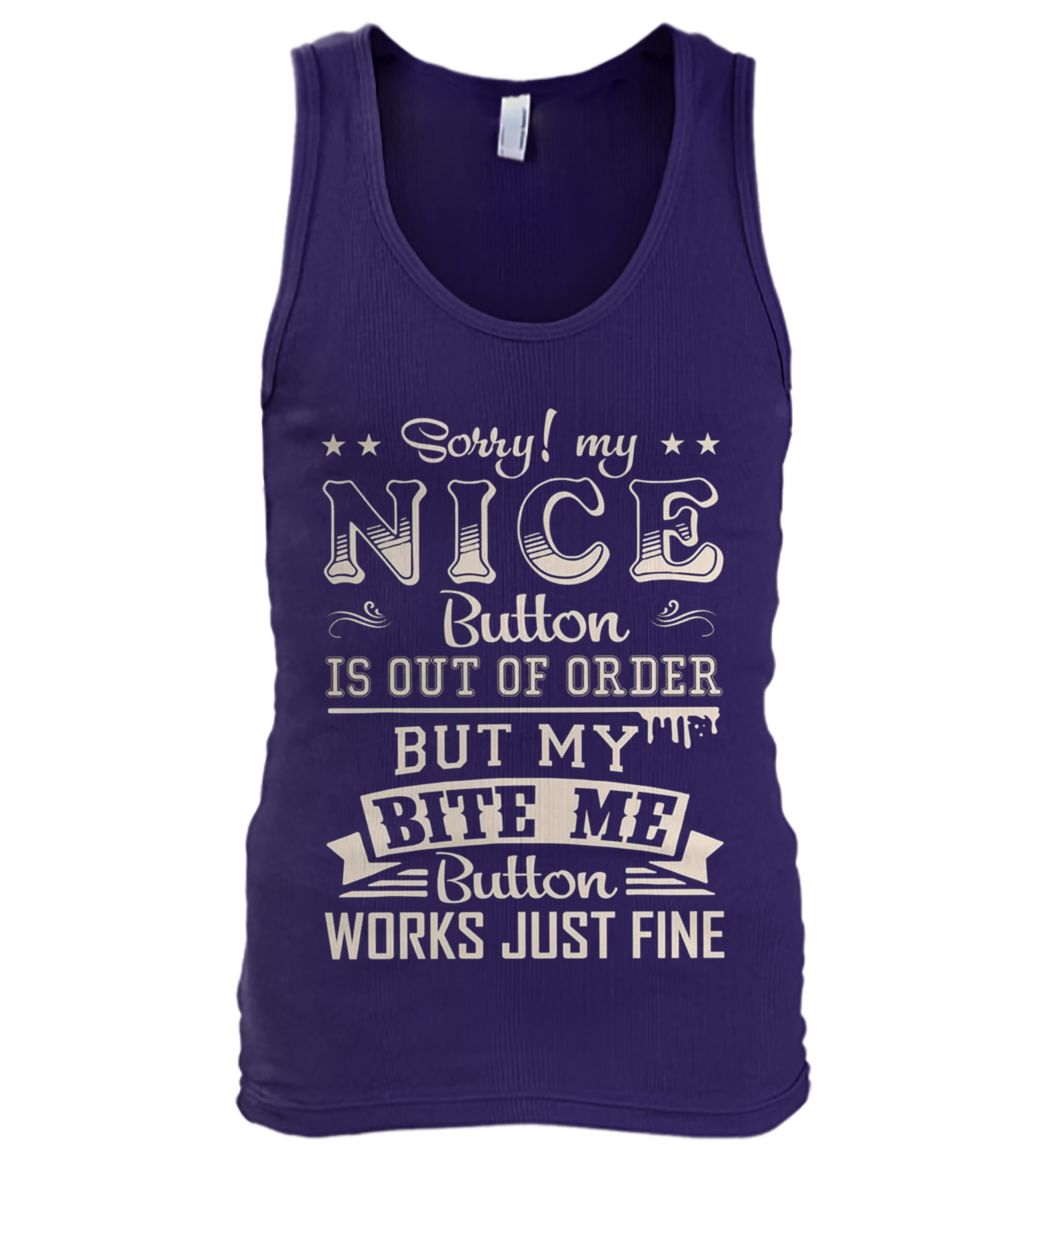 Sorry my nice button out of order but my bite me button works just fine men's tank top